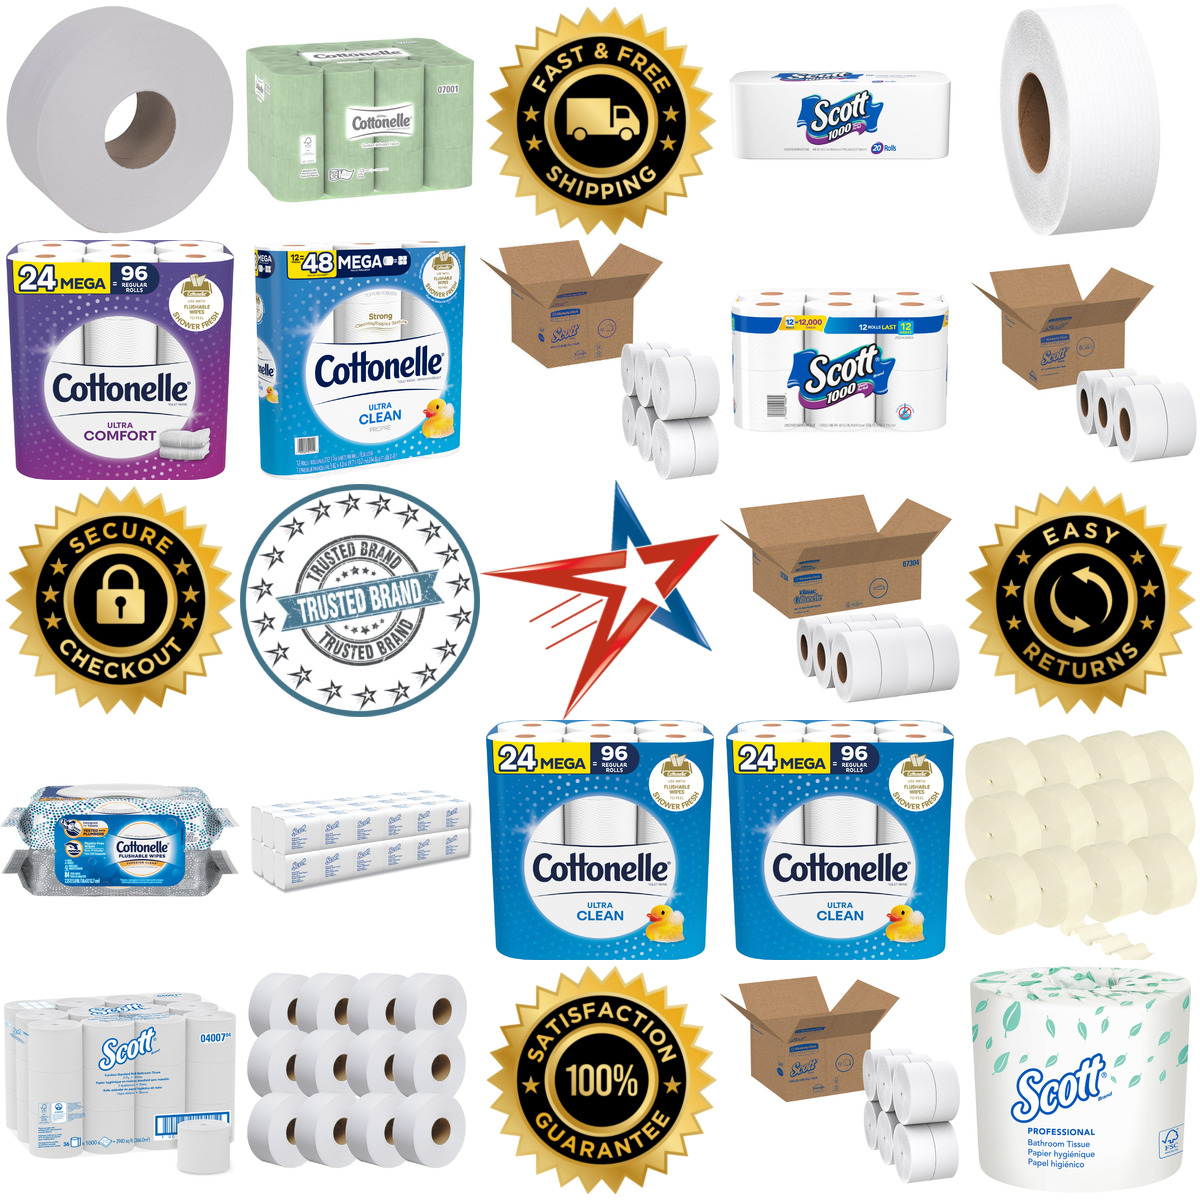 A selection of Kimberly Clark products on GoVets